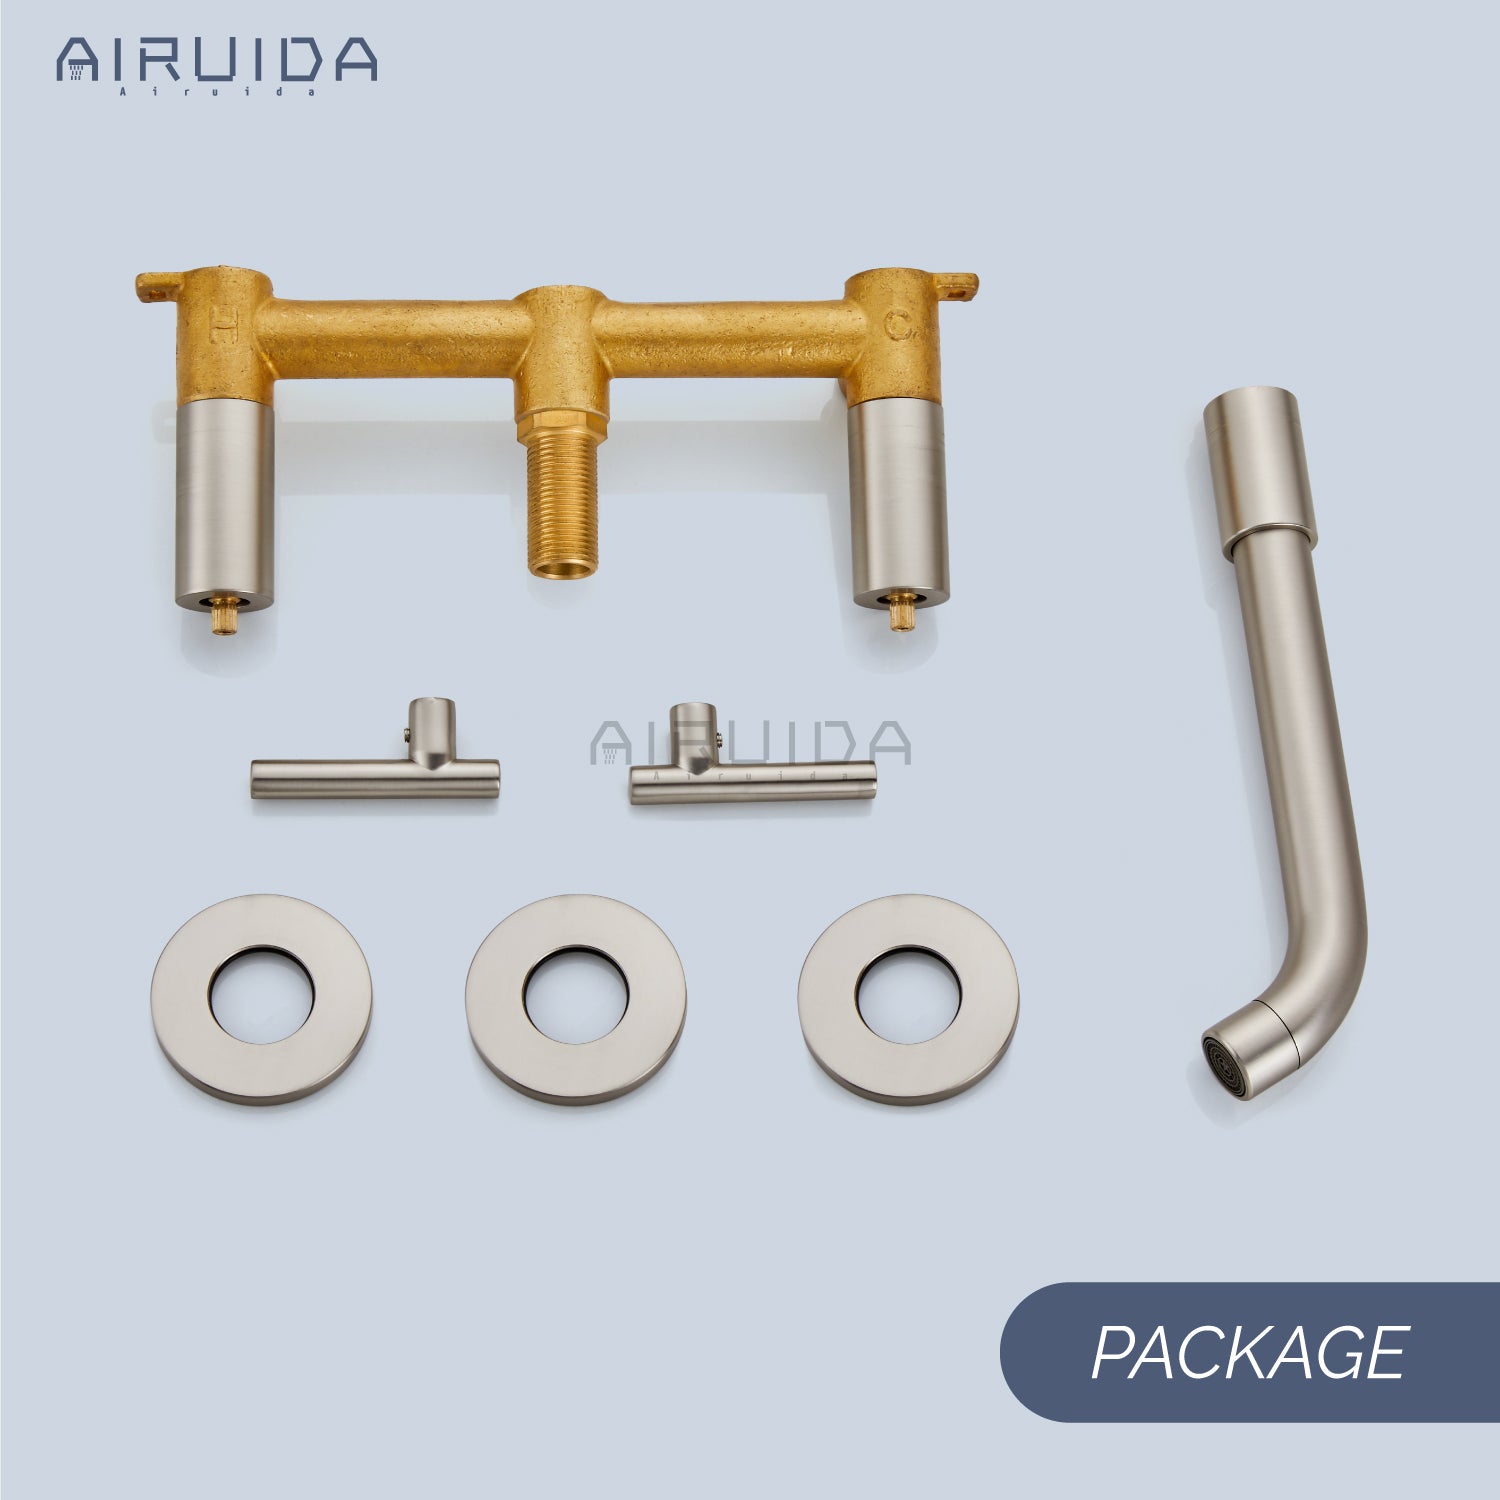 Airuida Wall Mount Bathroom Faucet Solid Brass Widespread Bathroom 360 Swivel Spout Sink Faucet Double Handles Lavatory Basin Sink Mixing Faucet with Rough in Valve